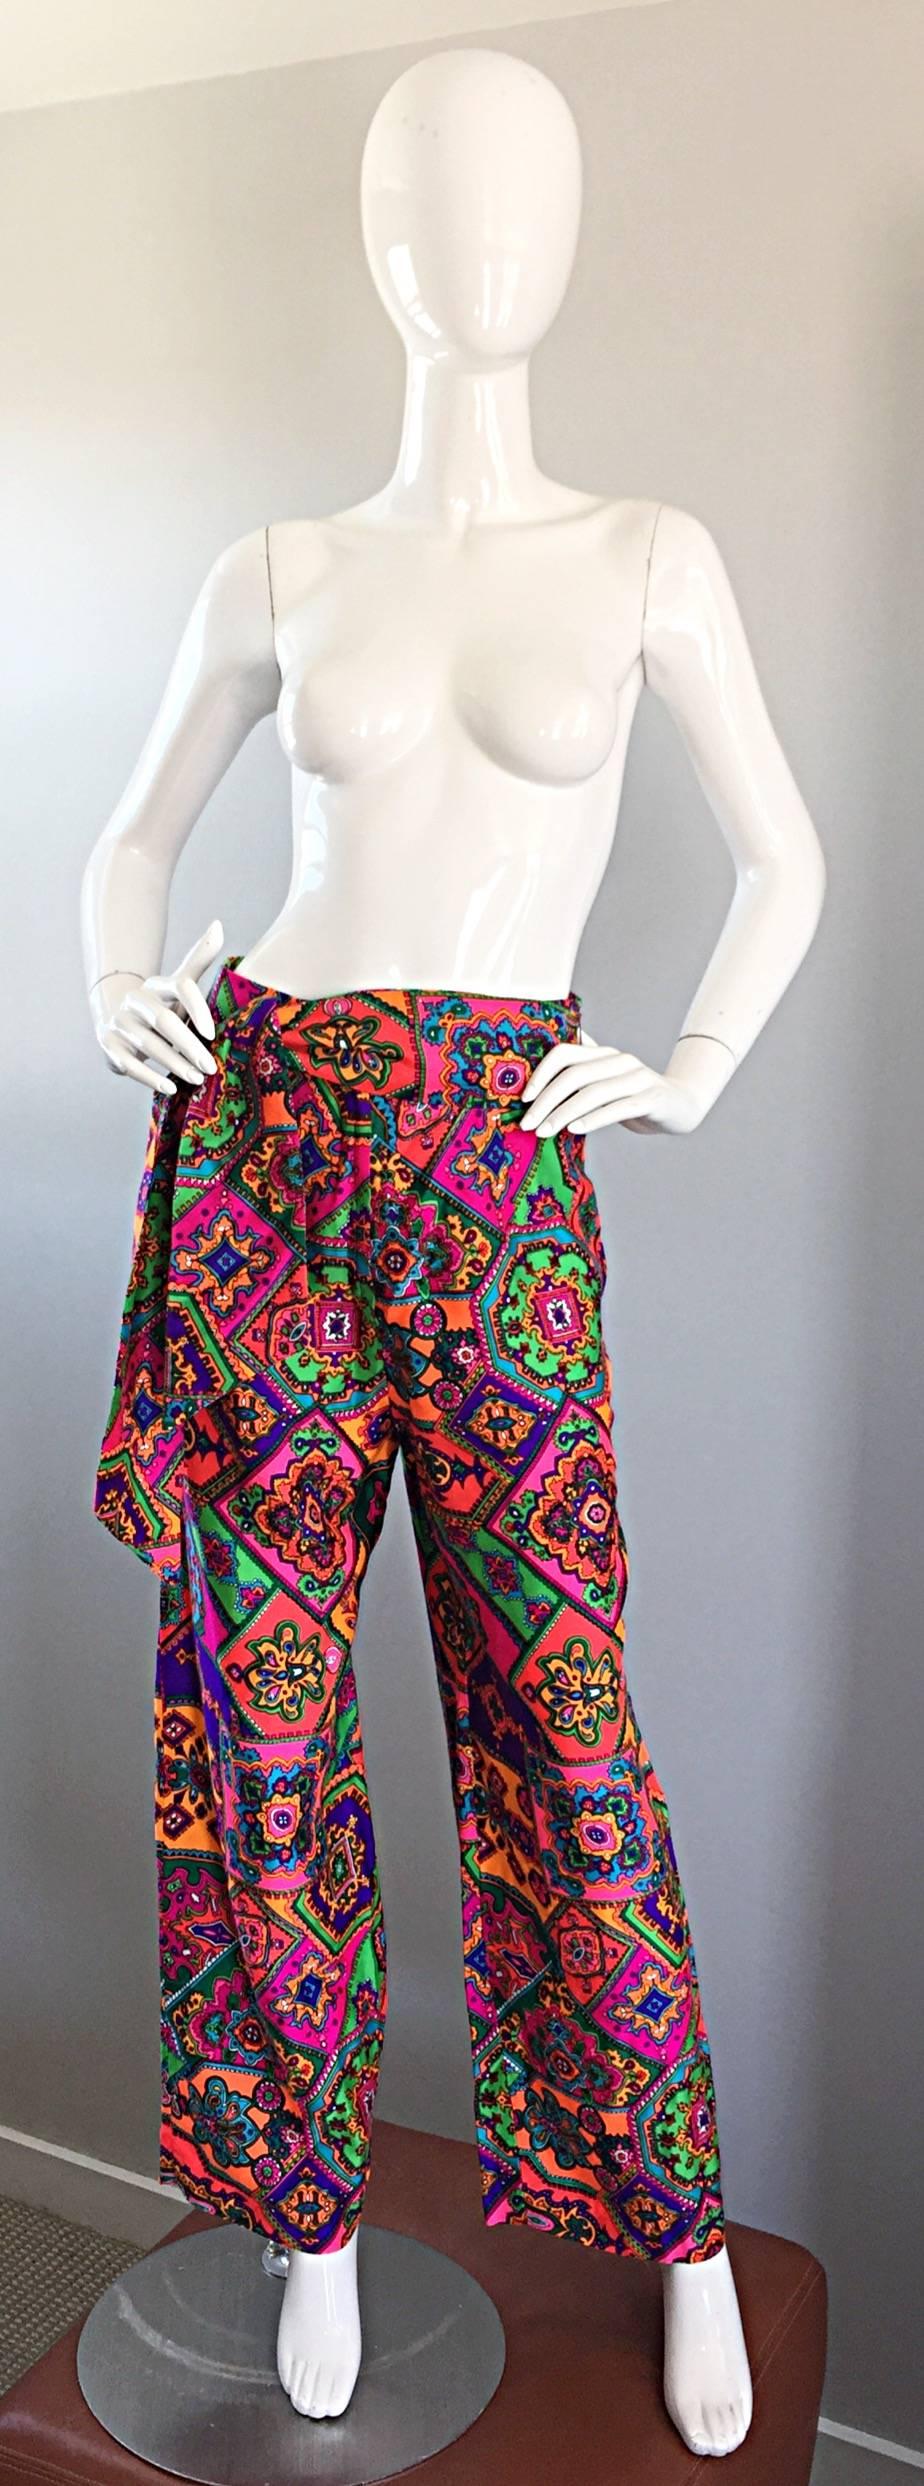 Incredible vintage 1970s ALEX COLEMAN wide leg palazzo trousers, with detachable sash belt! Chic fit, with an impressive colorful mosaic print. Features pretty much every color of the rainbow--pink, purple, blue, green, orange, blue, etc. Sash can